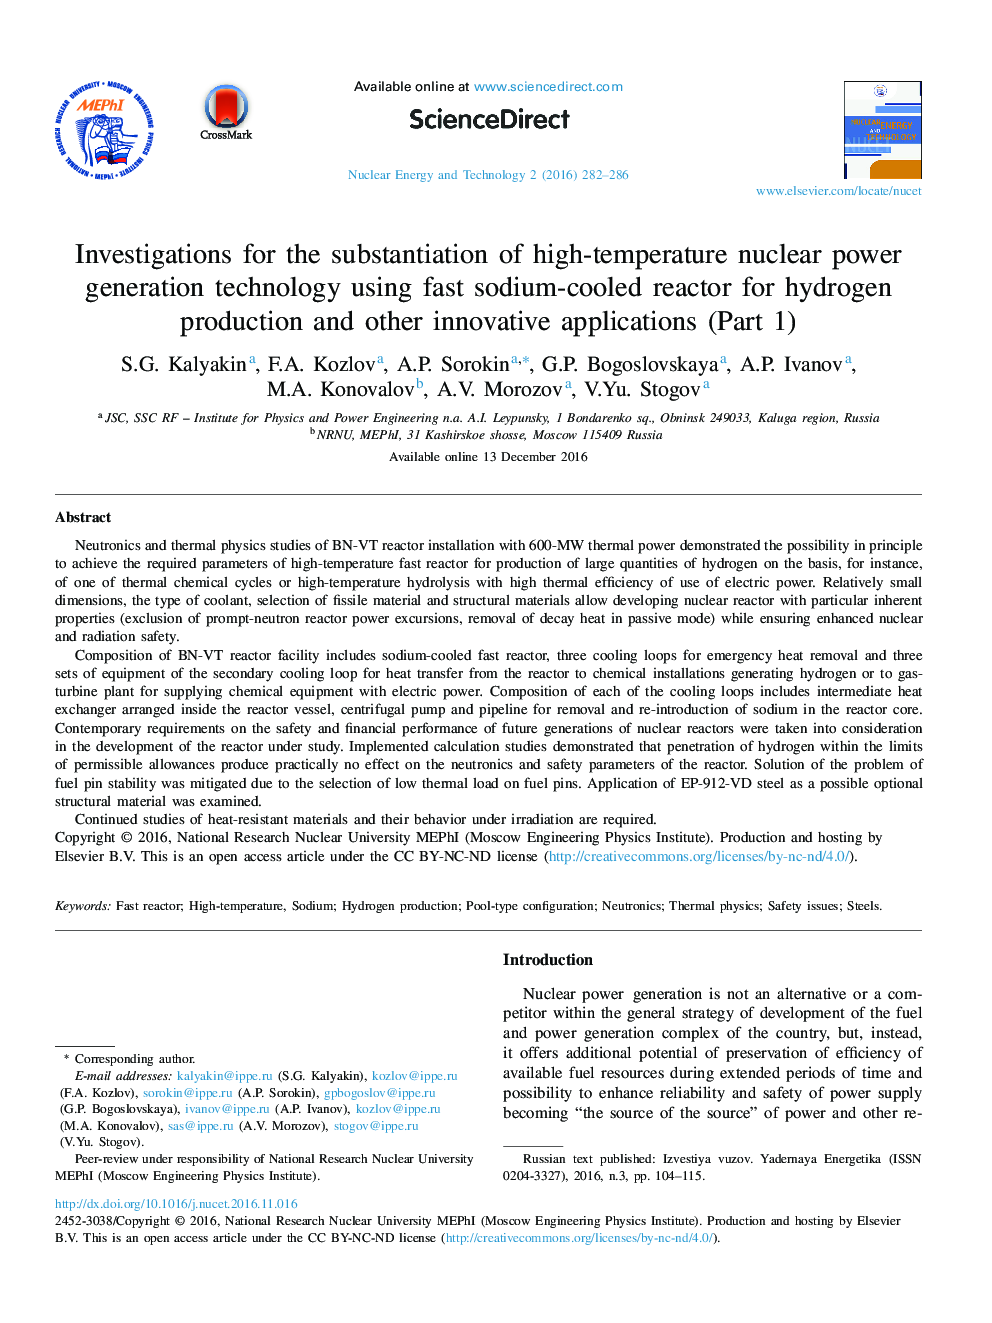 Investigations for the substantiation of high-temperature nuclear power generation technology using fast sodium-cooled reactor for hydrogen production and other innovative applications (Part 1)